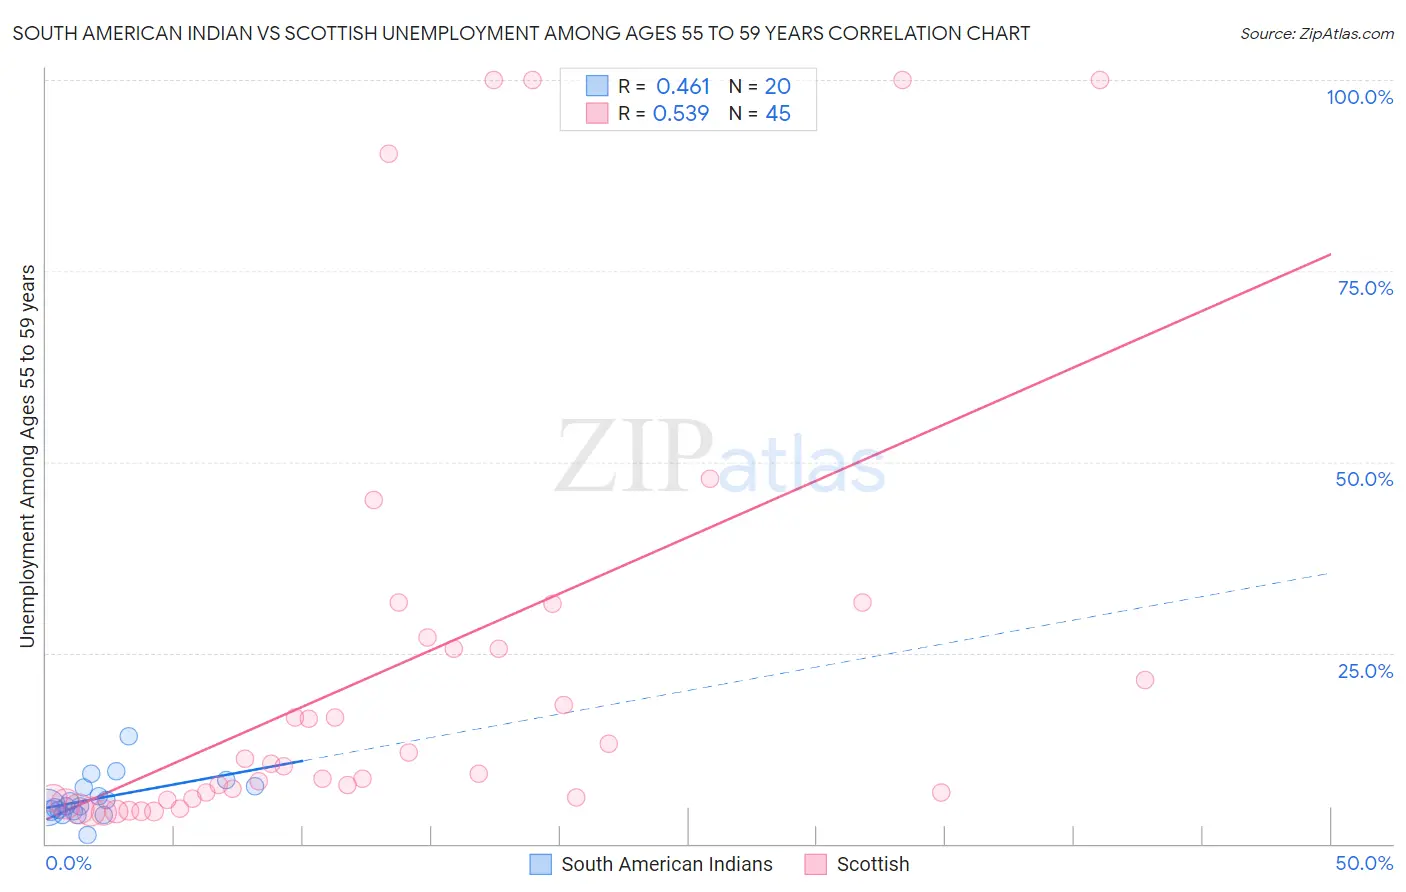 South American Indian vs Scottish Unemployment Among Ages 55 to 59 years